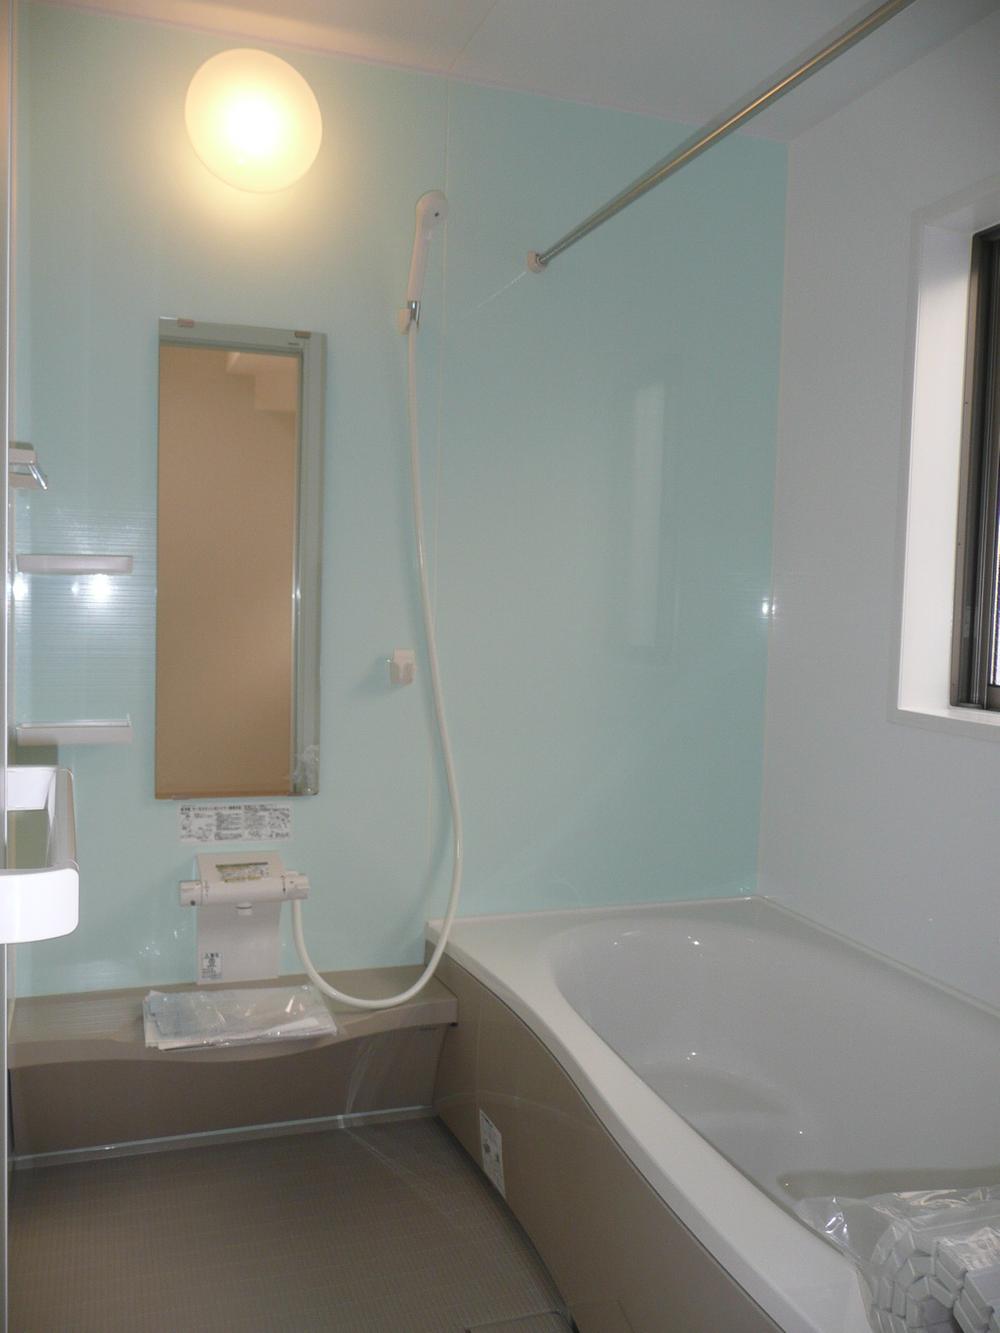 Bathroom. Light blue is the bathroom with cleanliness of accent.